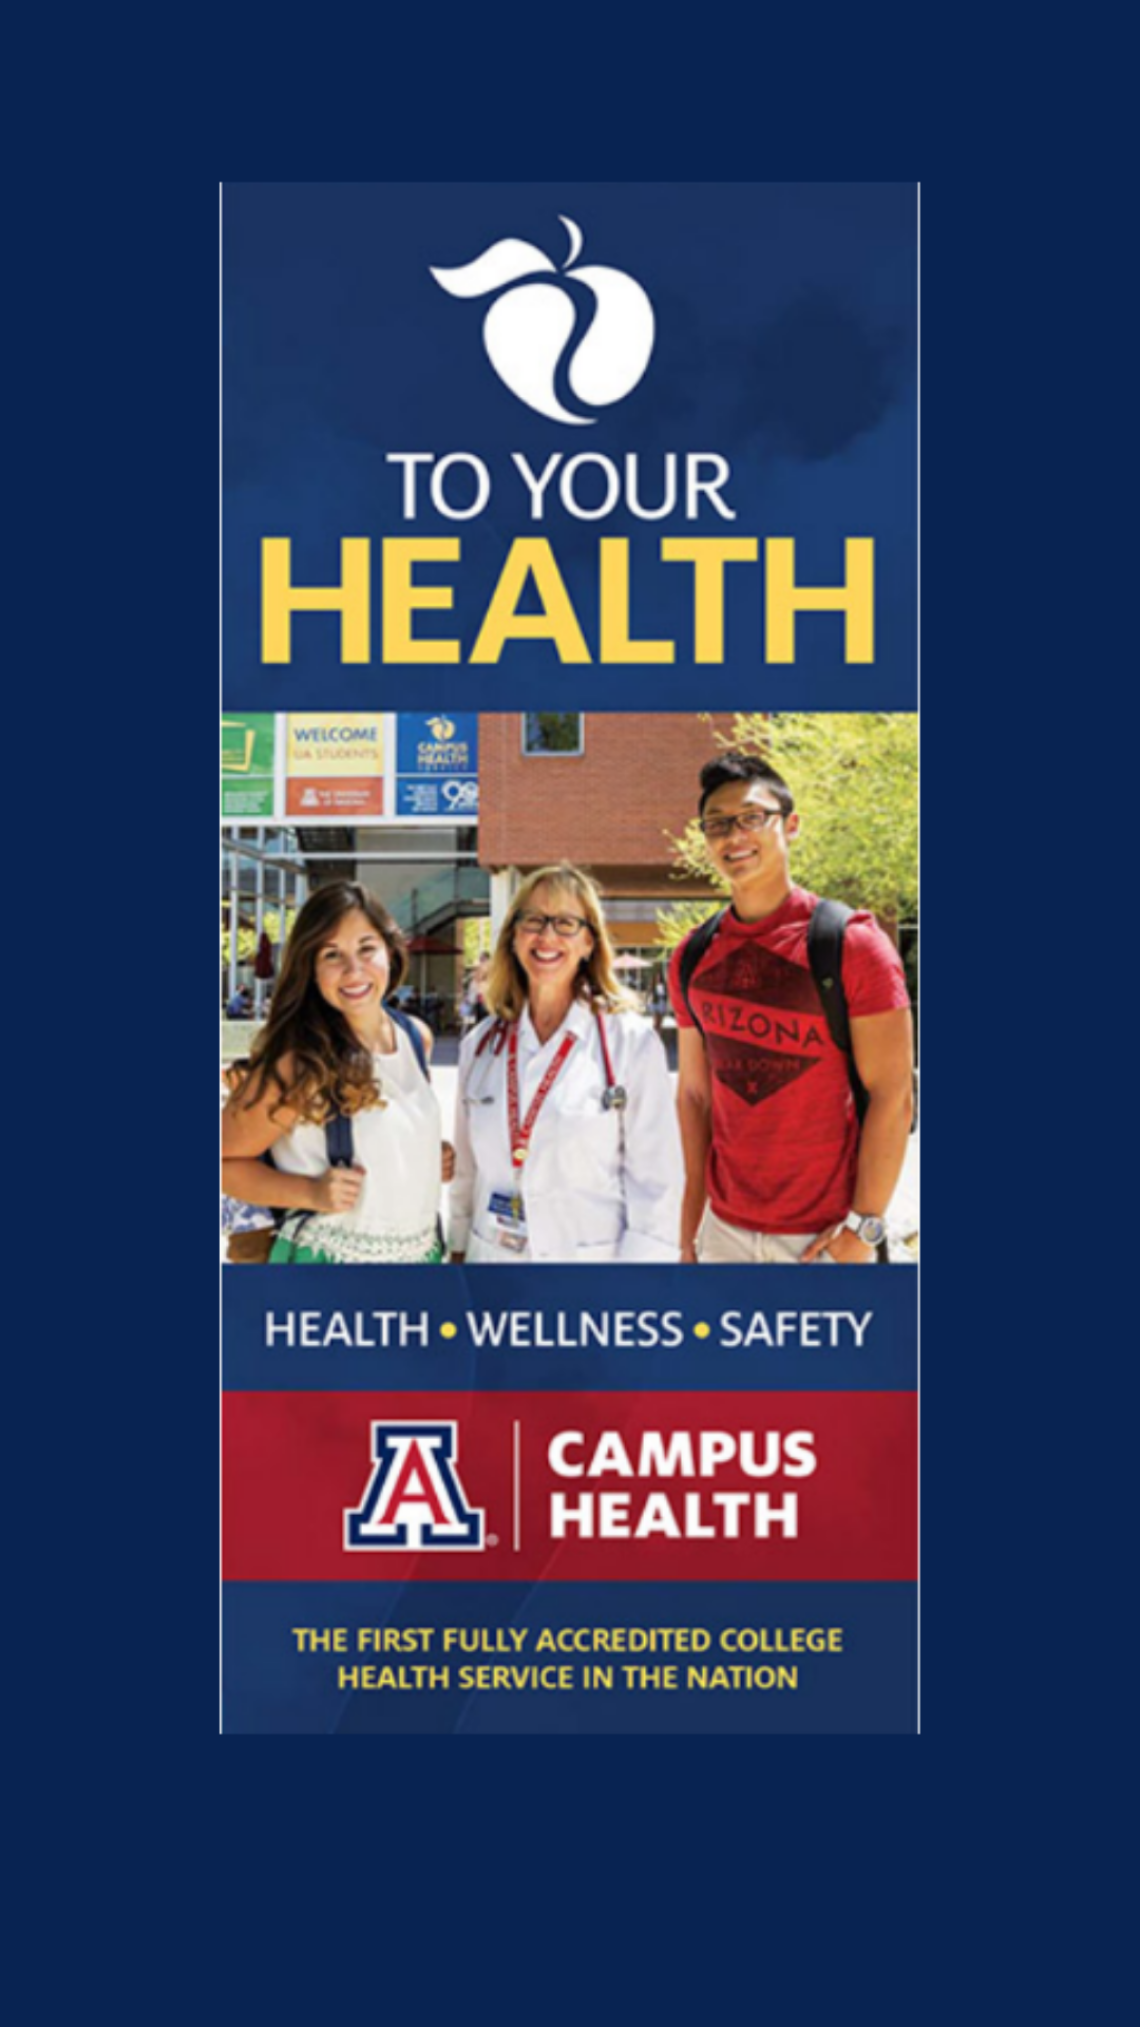 Campus health "To Your Health" poster